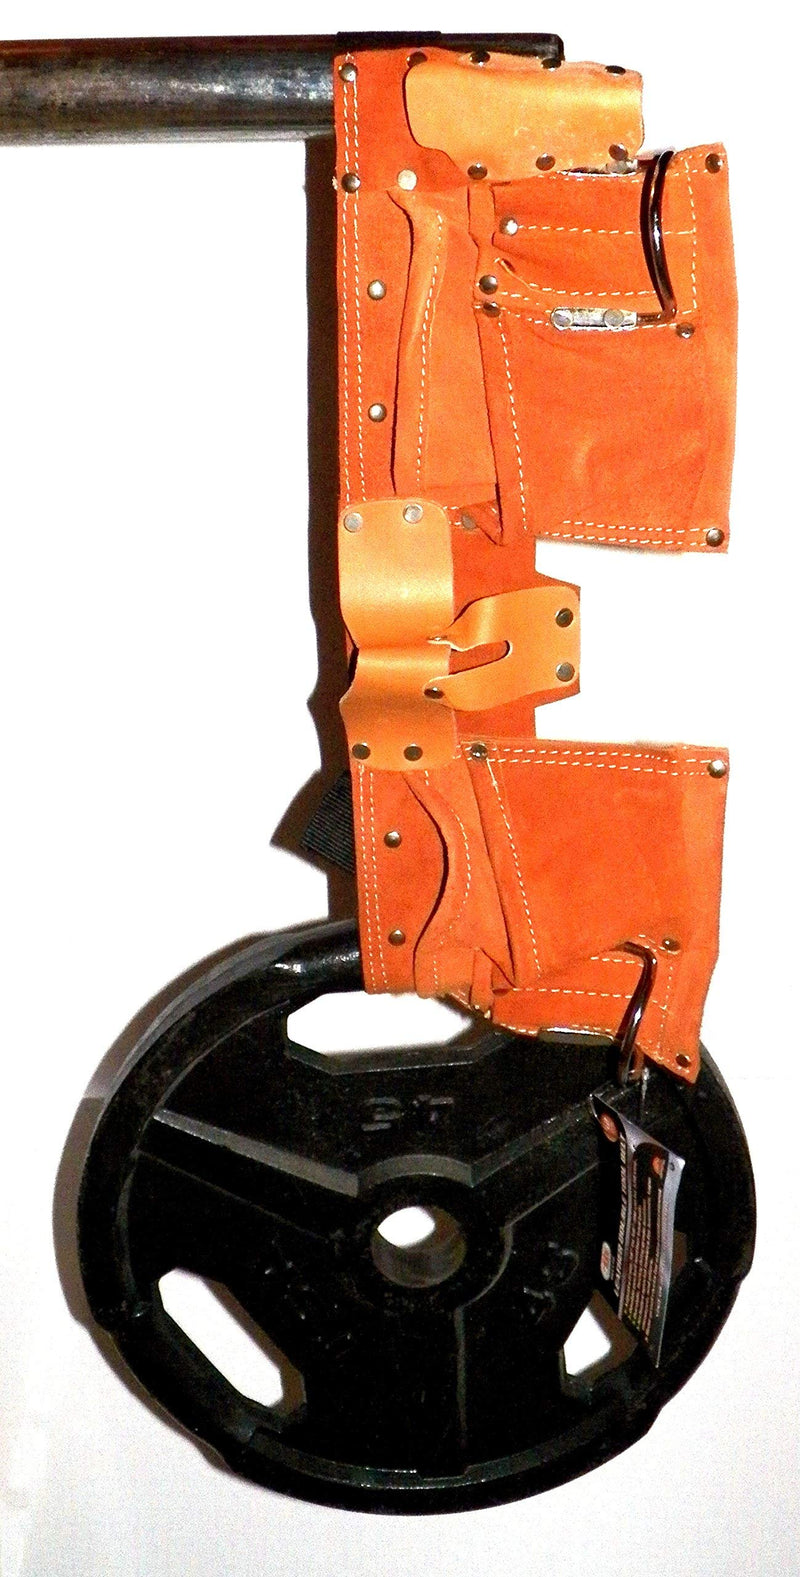 IIT 91112 7 Pocket Leather Tool belt, Polyweb belt with quick release buckle. - NewNest Australia